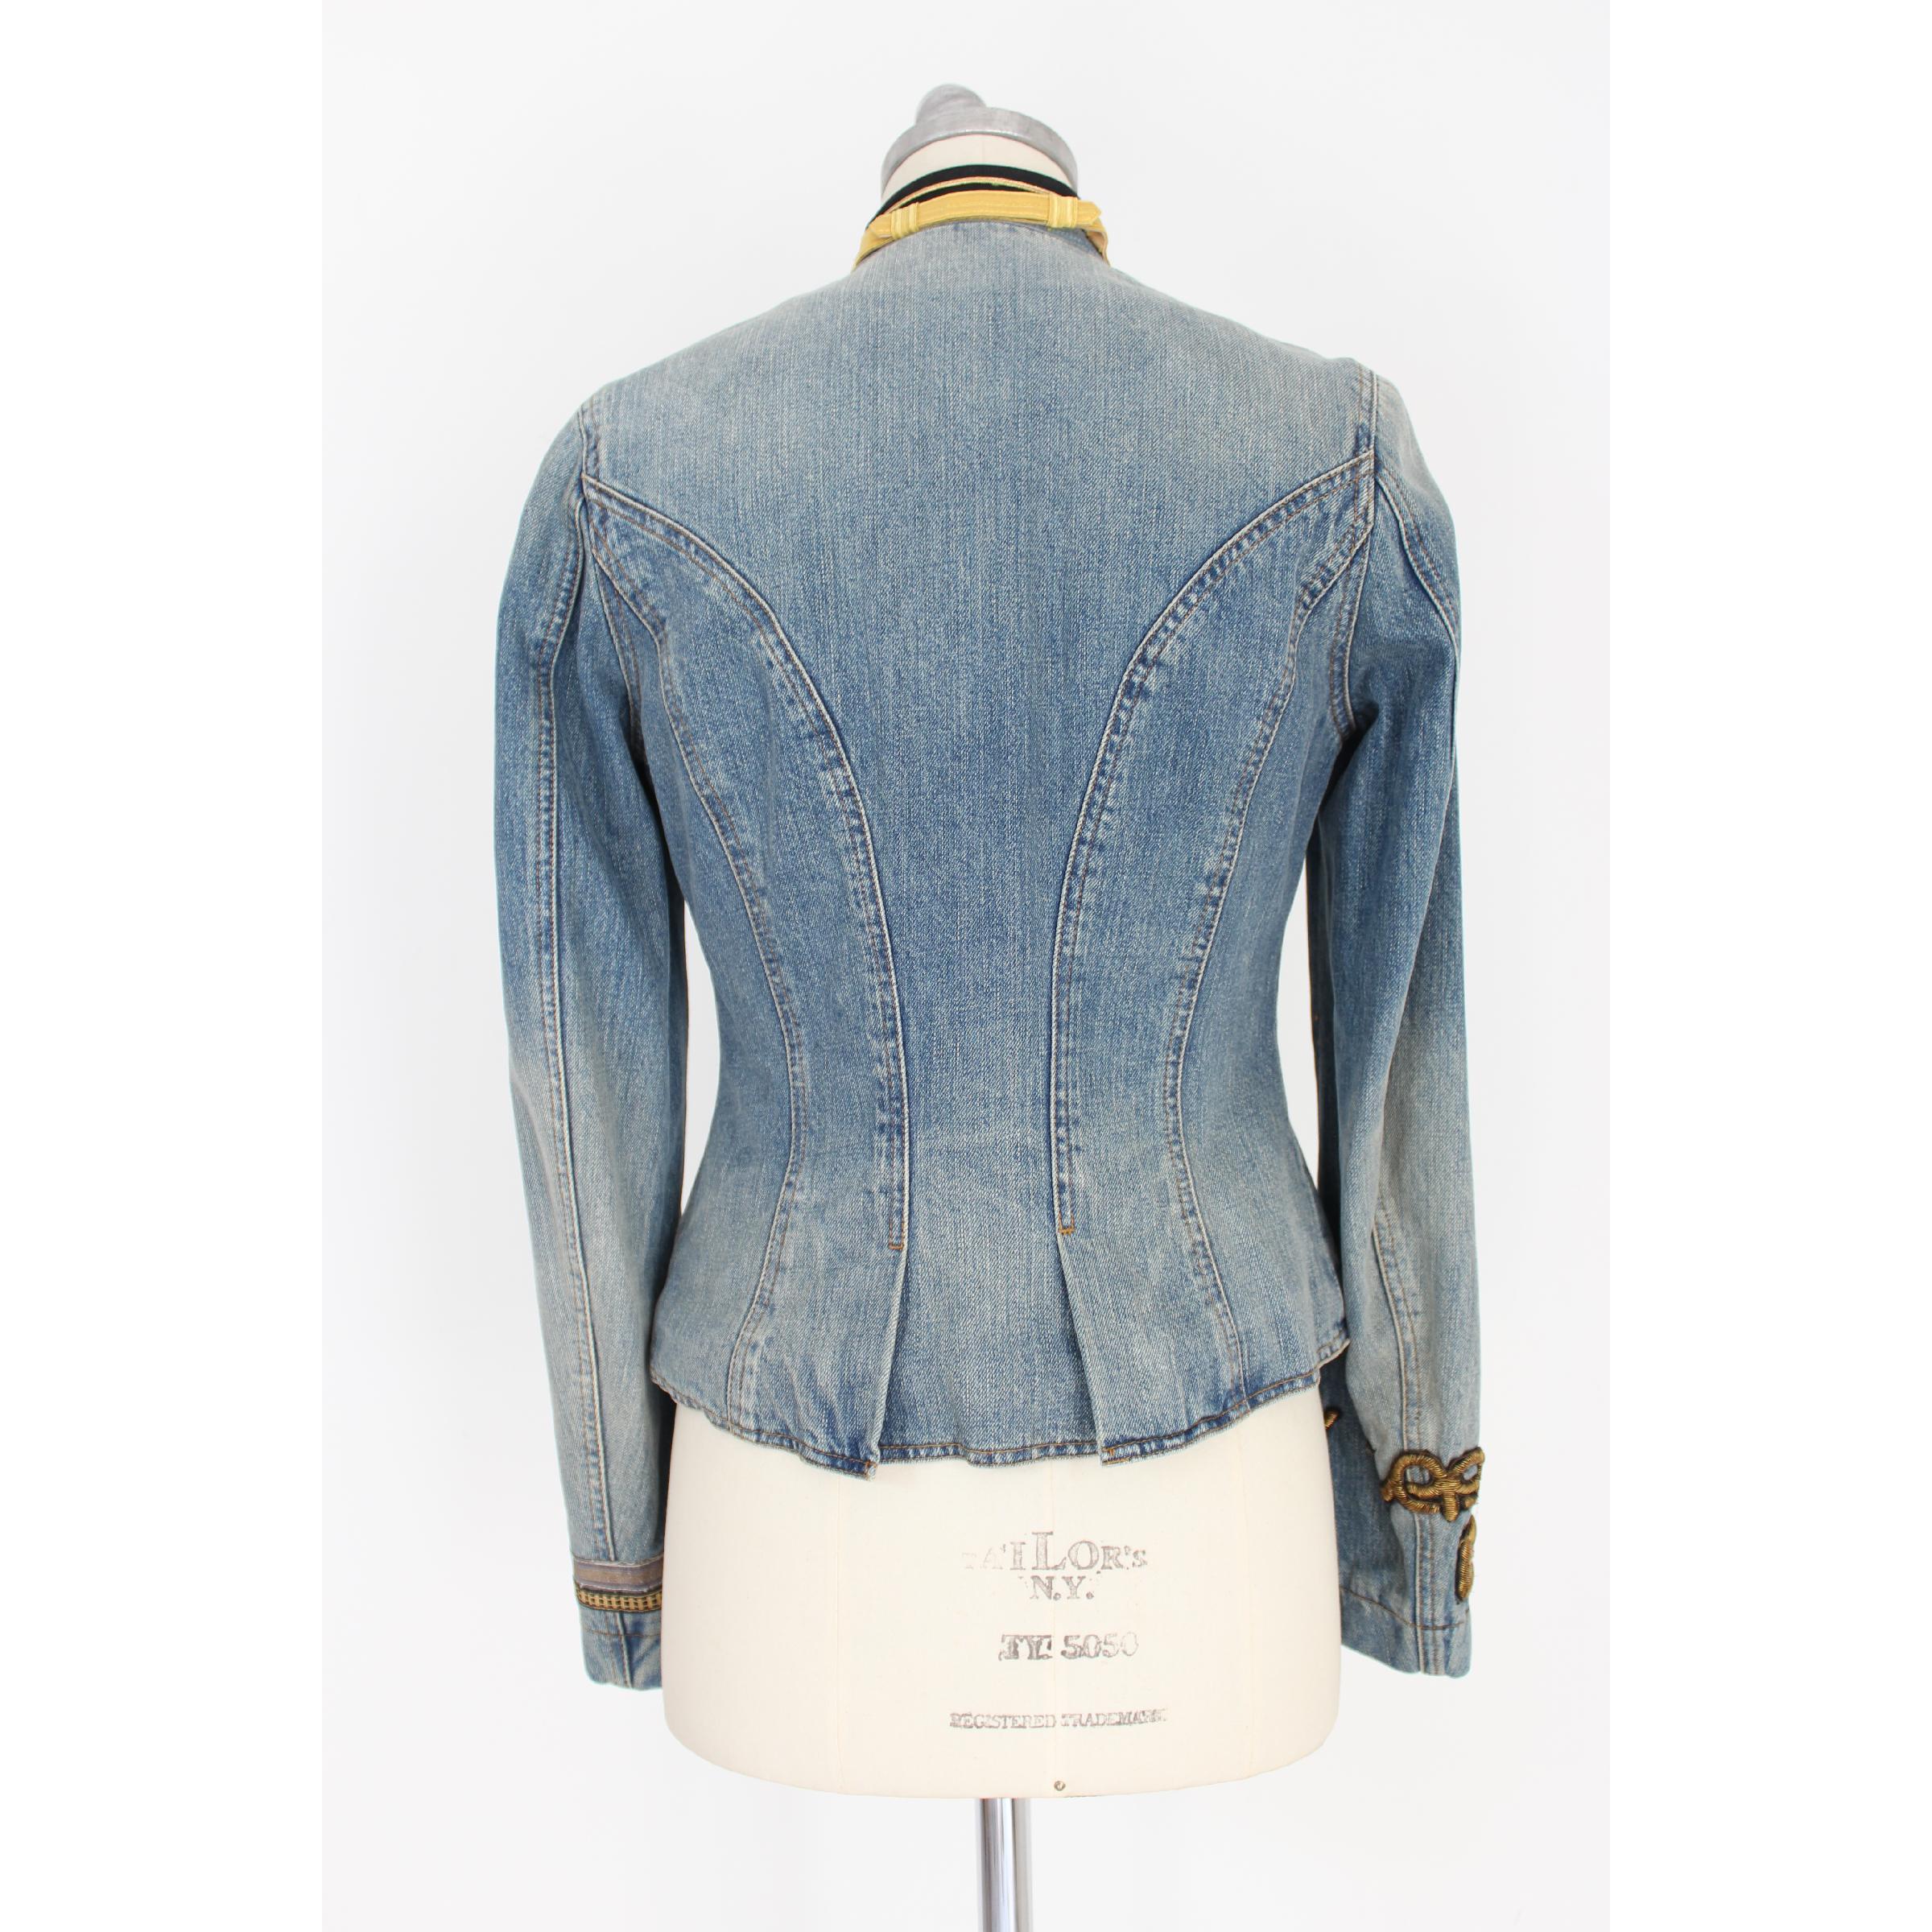 Ralph Lauren vintage 90s women's denim jacket. Flared model, stand-up collar with gold-colored details, buttons one different from the other. 100% cotton . Excellent vintage condition.

Size: 42 It 8 Us 10 Uk

Shoulder: 42 cm 
Chest / Chest: 48 cm